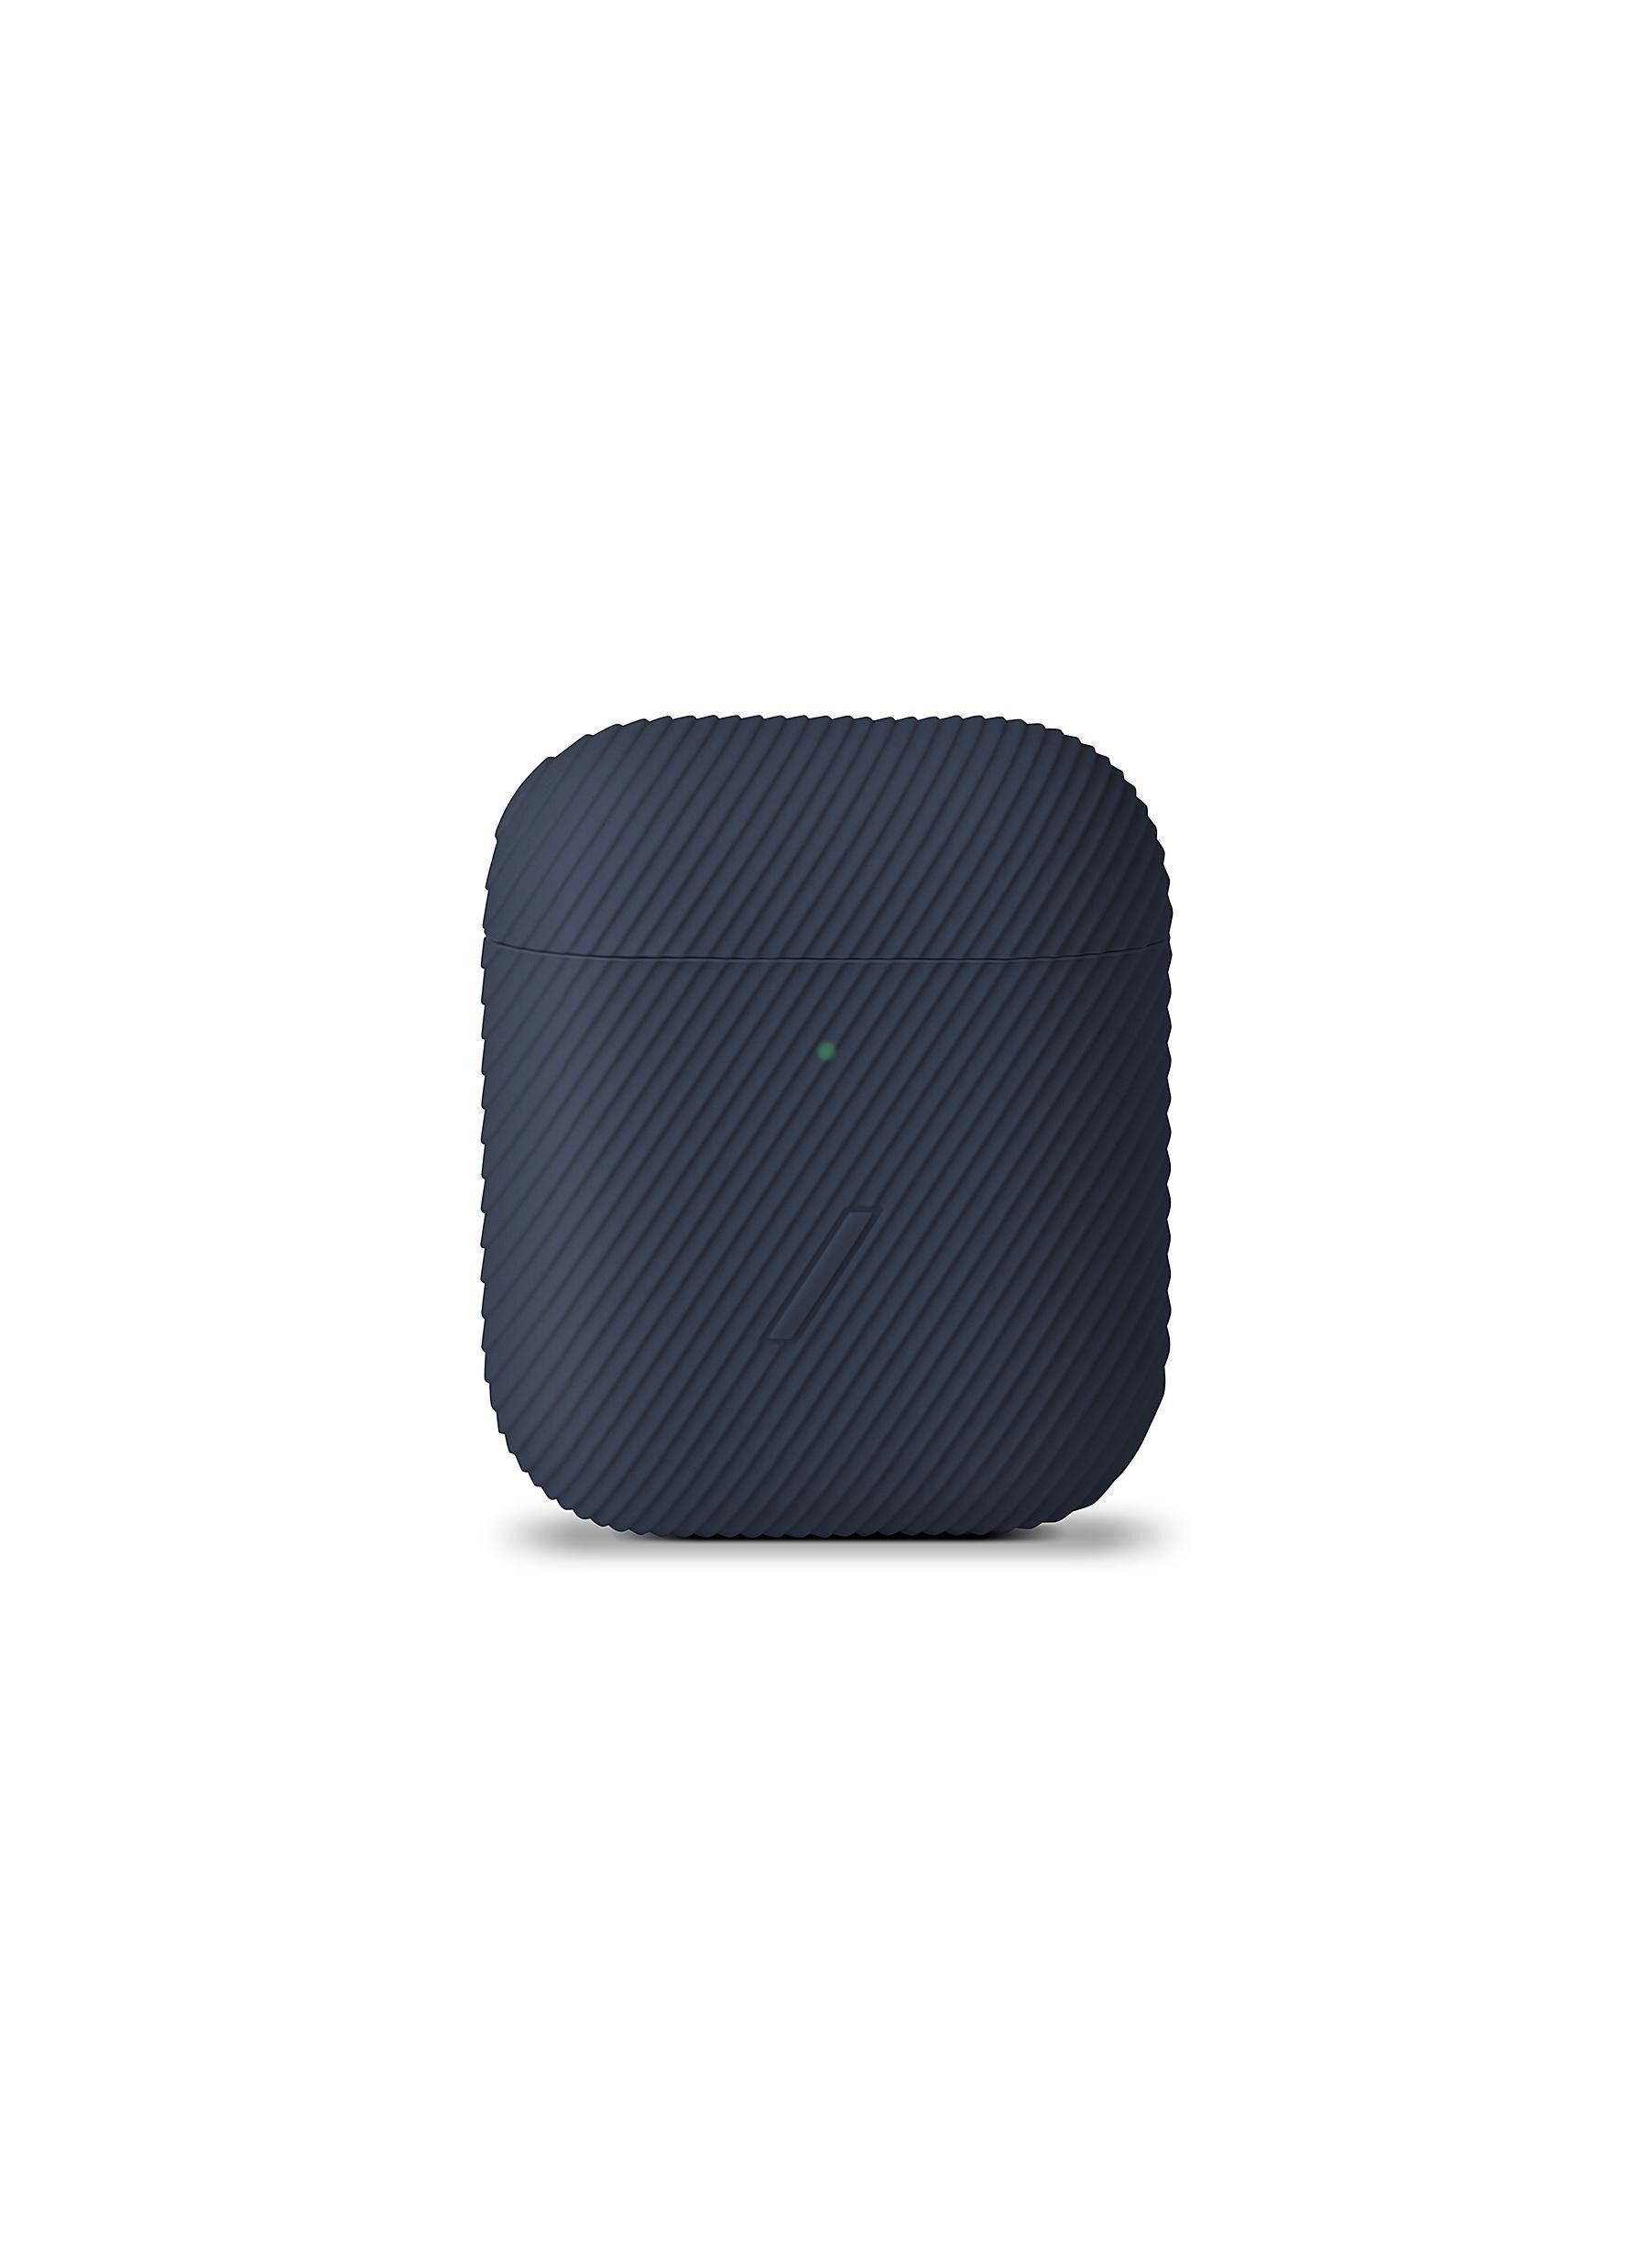 Native Union Curve Case for AirPods, Navy